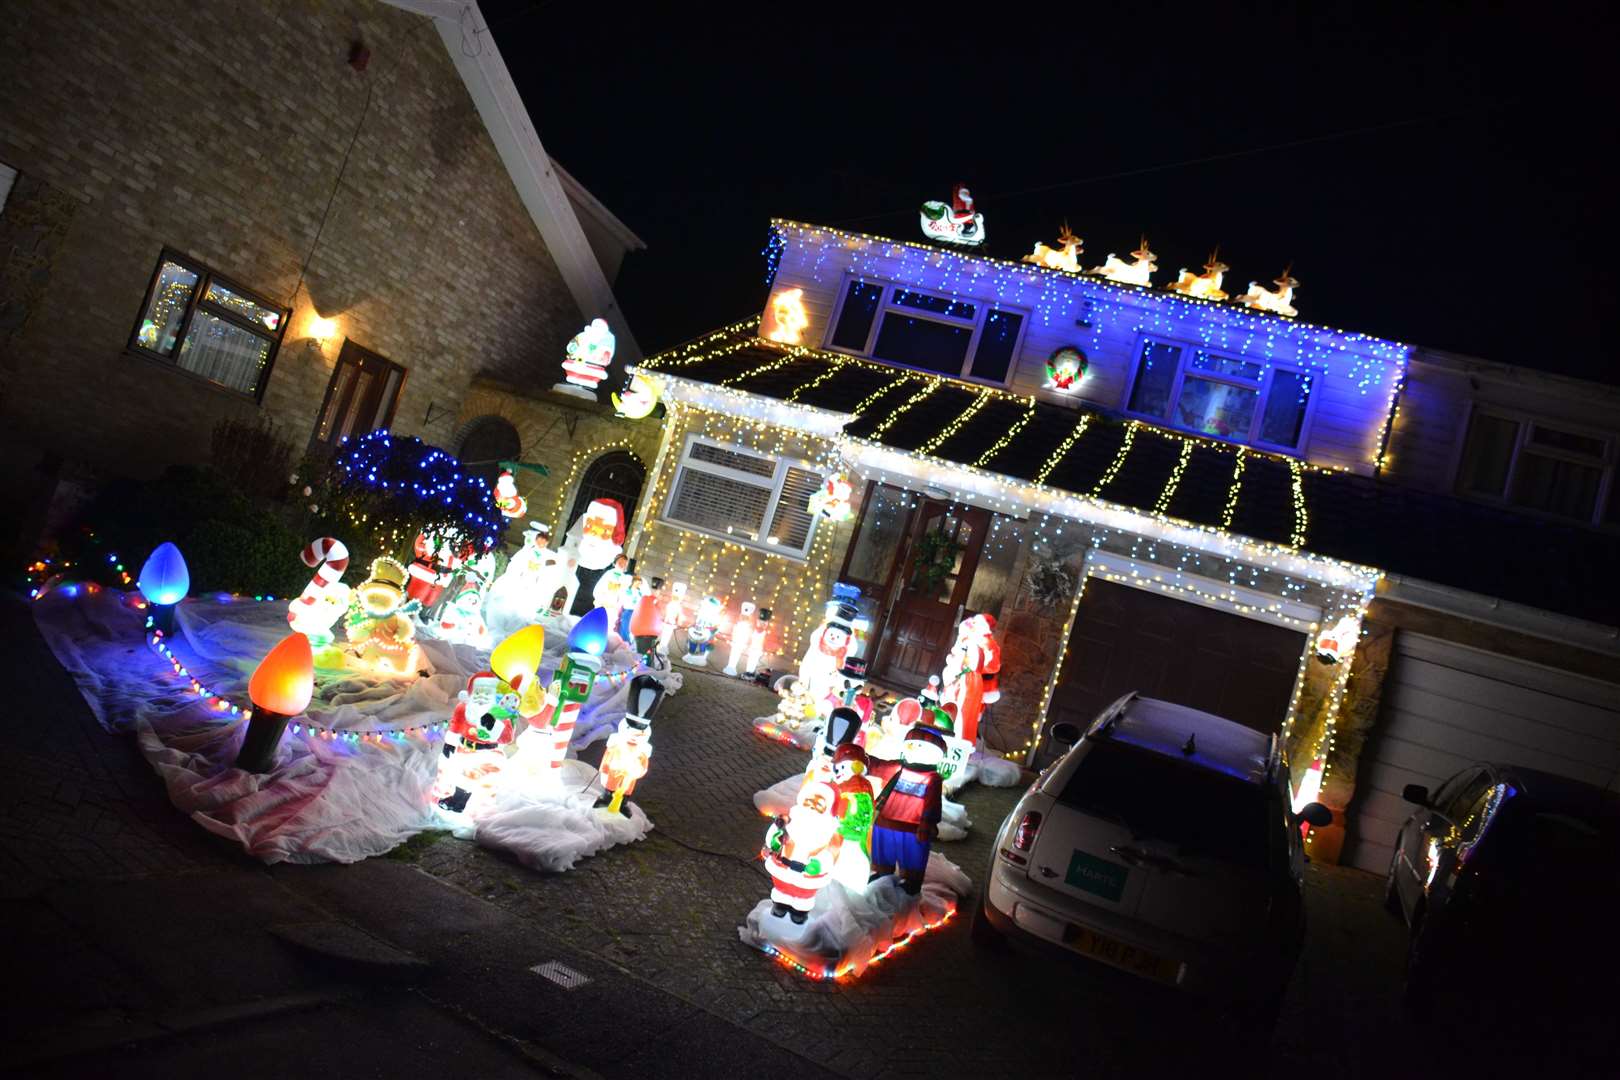 Luke Palmer, from Istead Rise, has already put up his Christmas decorations. Picture: Luke Palmer